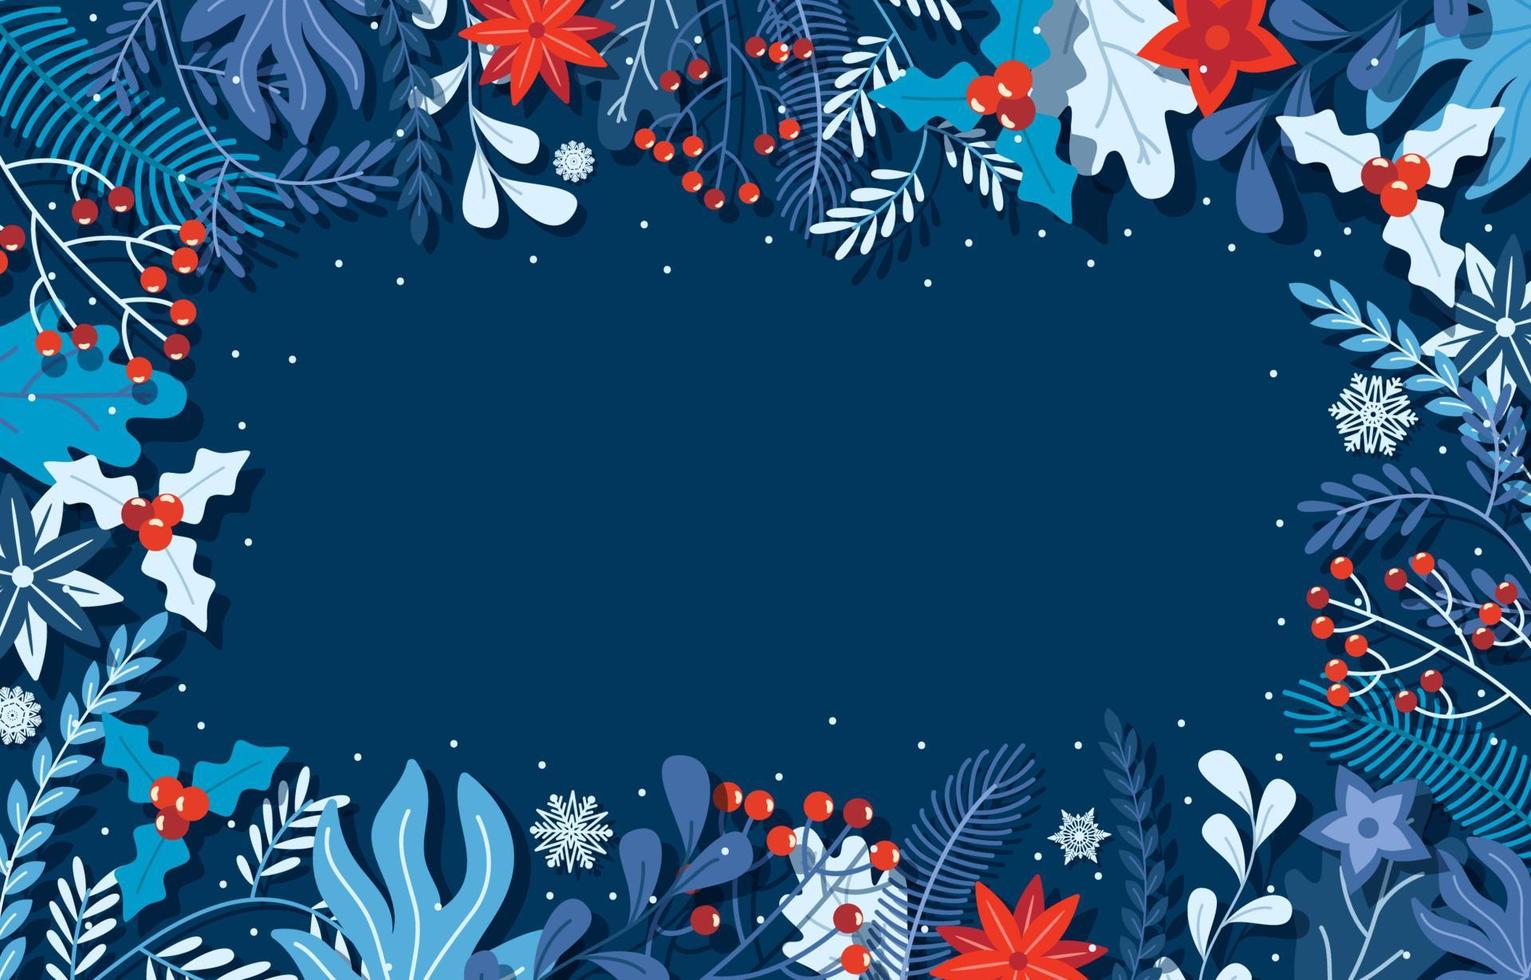 Border Background with Winter Elements vector